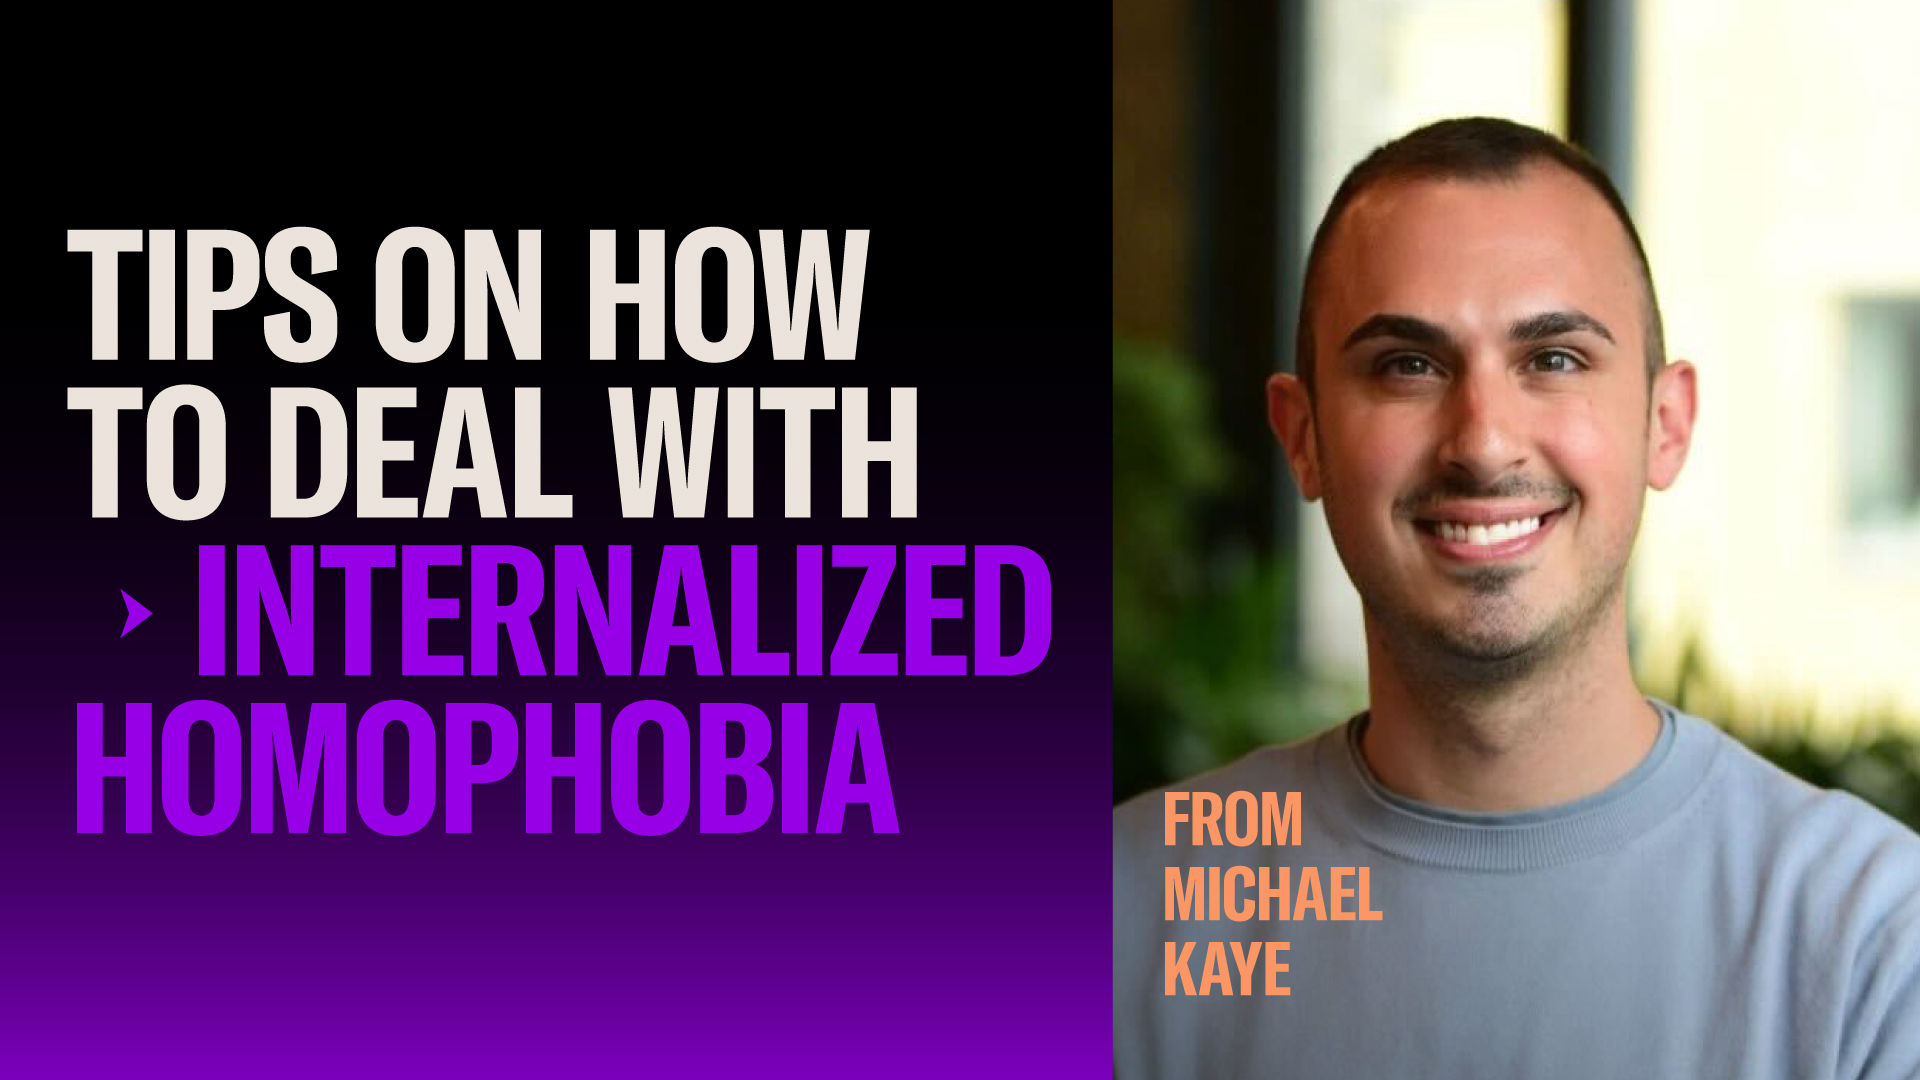 TIPS ON COPING WITH INTERNALIZED HOMOPHOBIA  Michael Kaye is the Director of Brand Marketing & Communications on Archer, and spent 5+ years volunteering with the Human Rights Campaign.